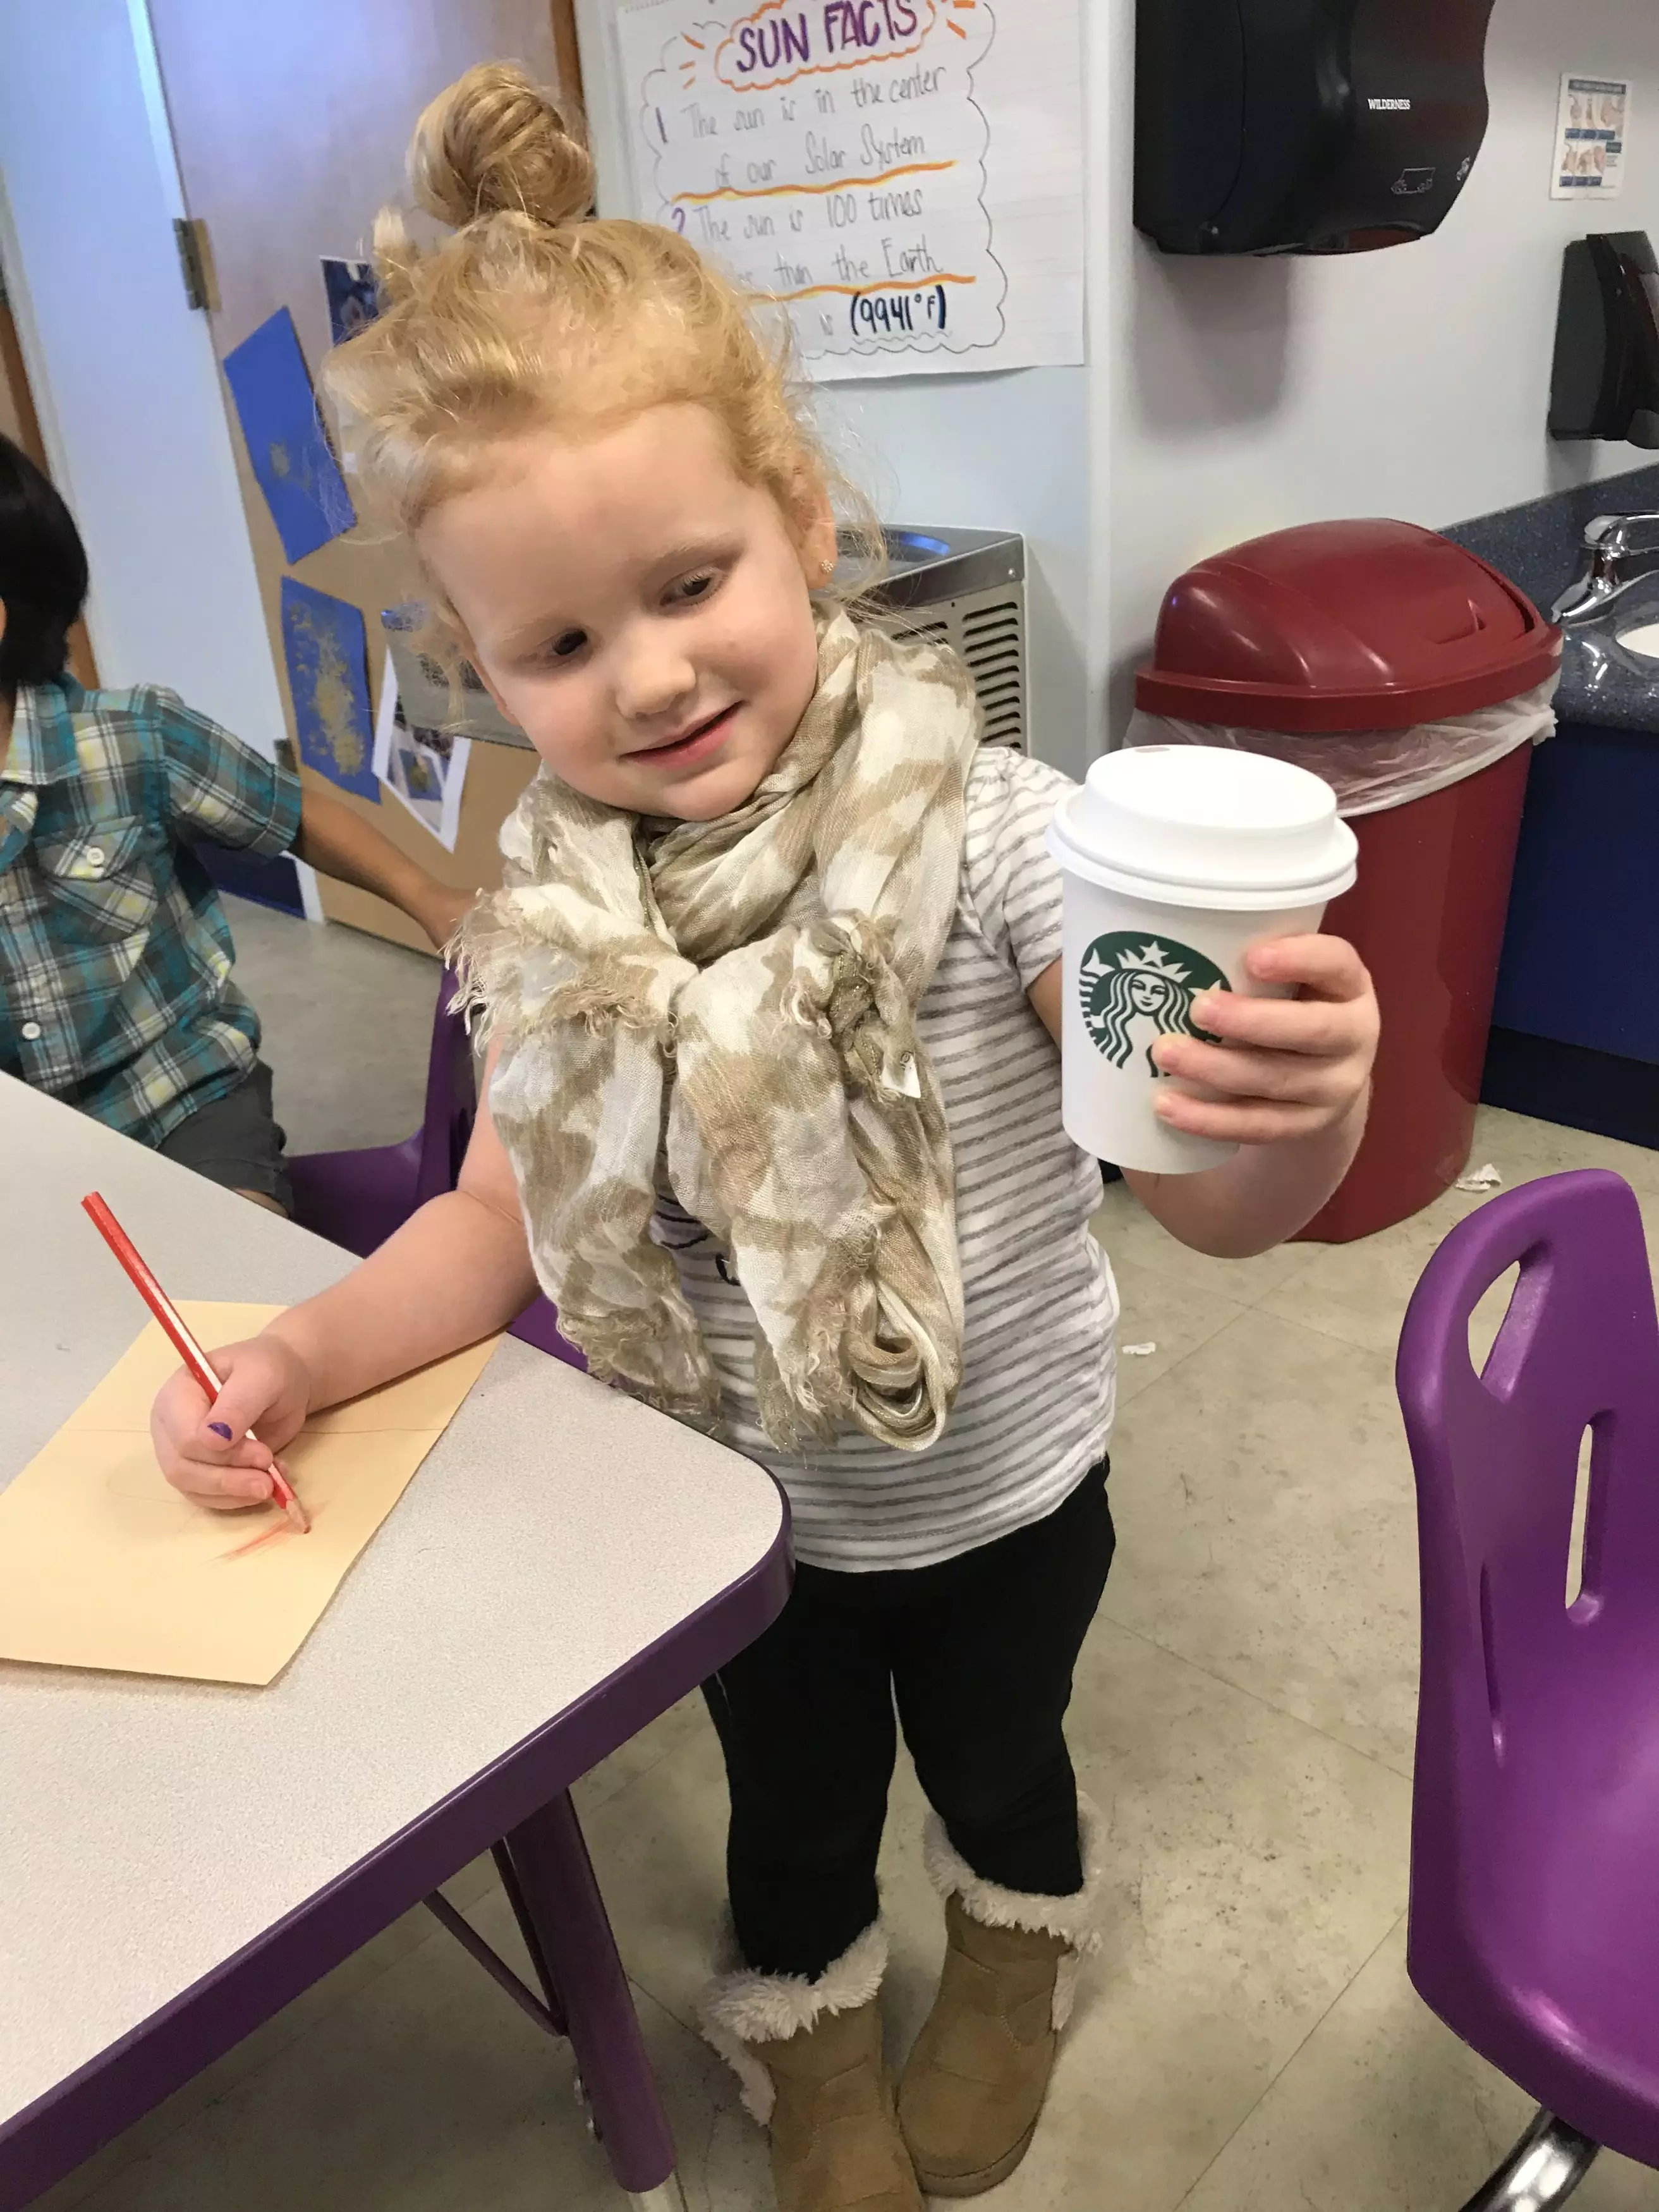 The little girl was dressed as a basic white 'b**ch' (